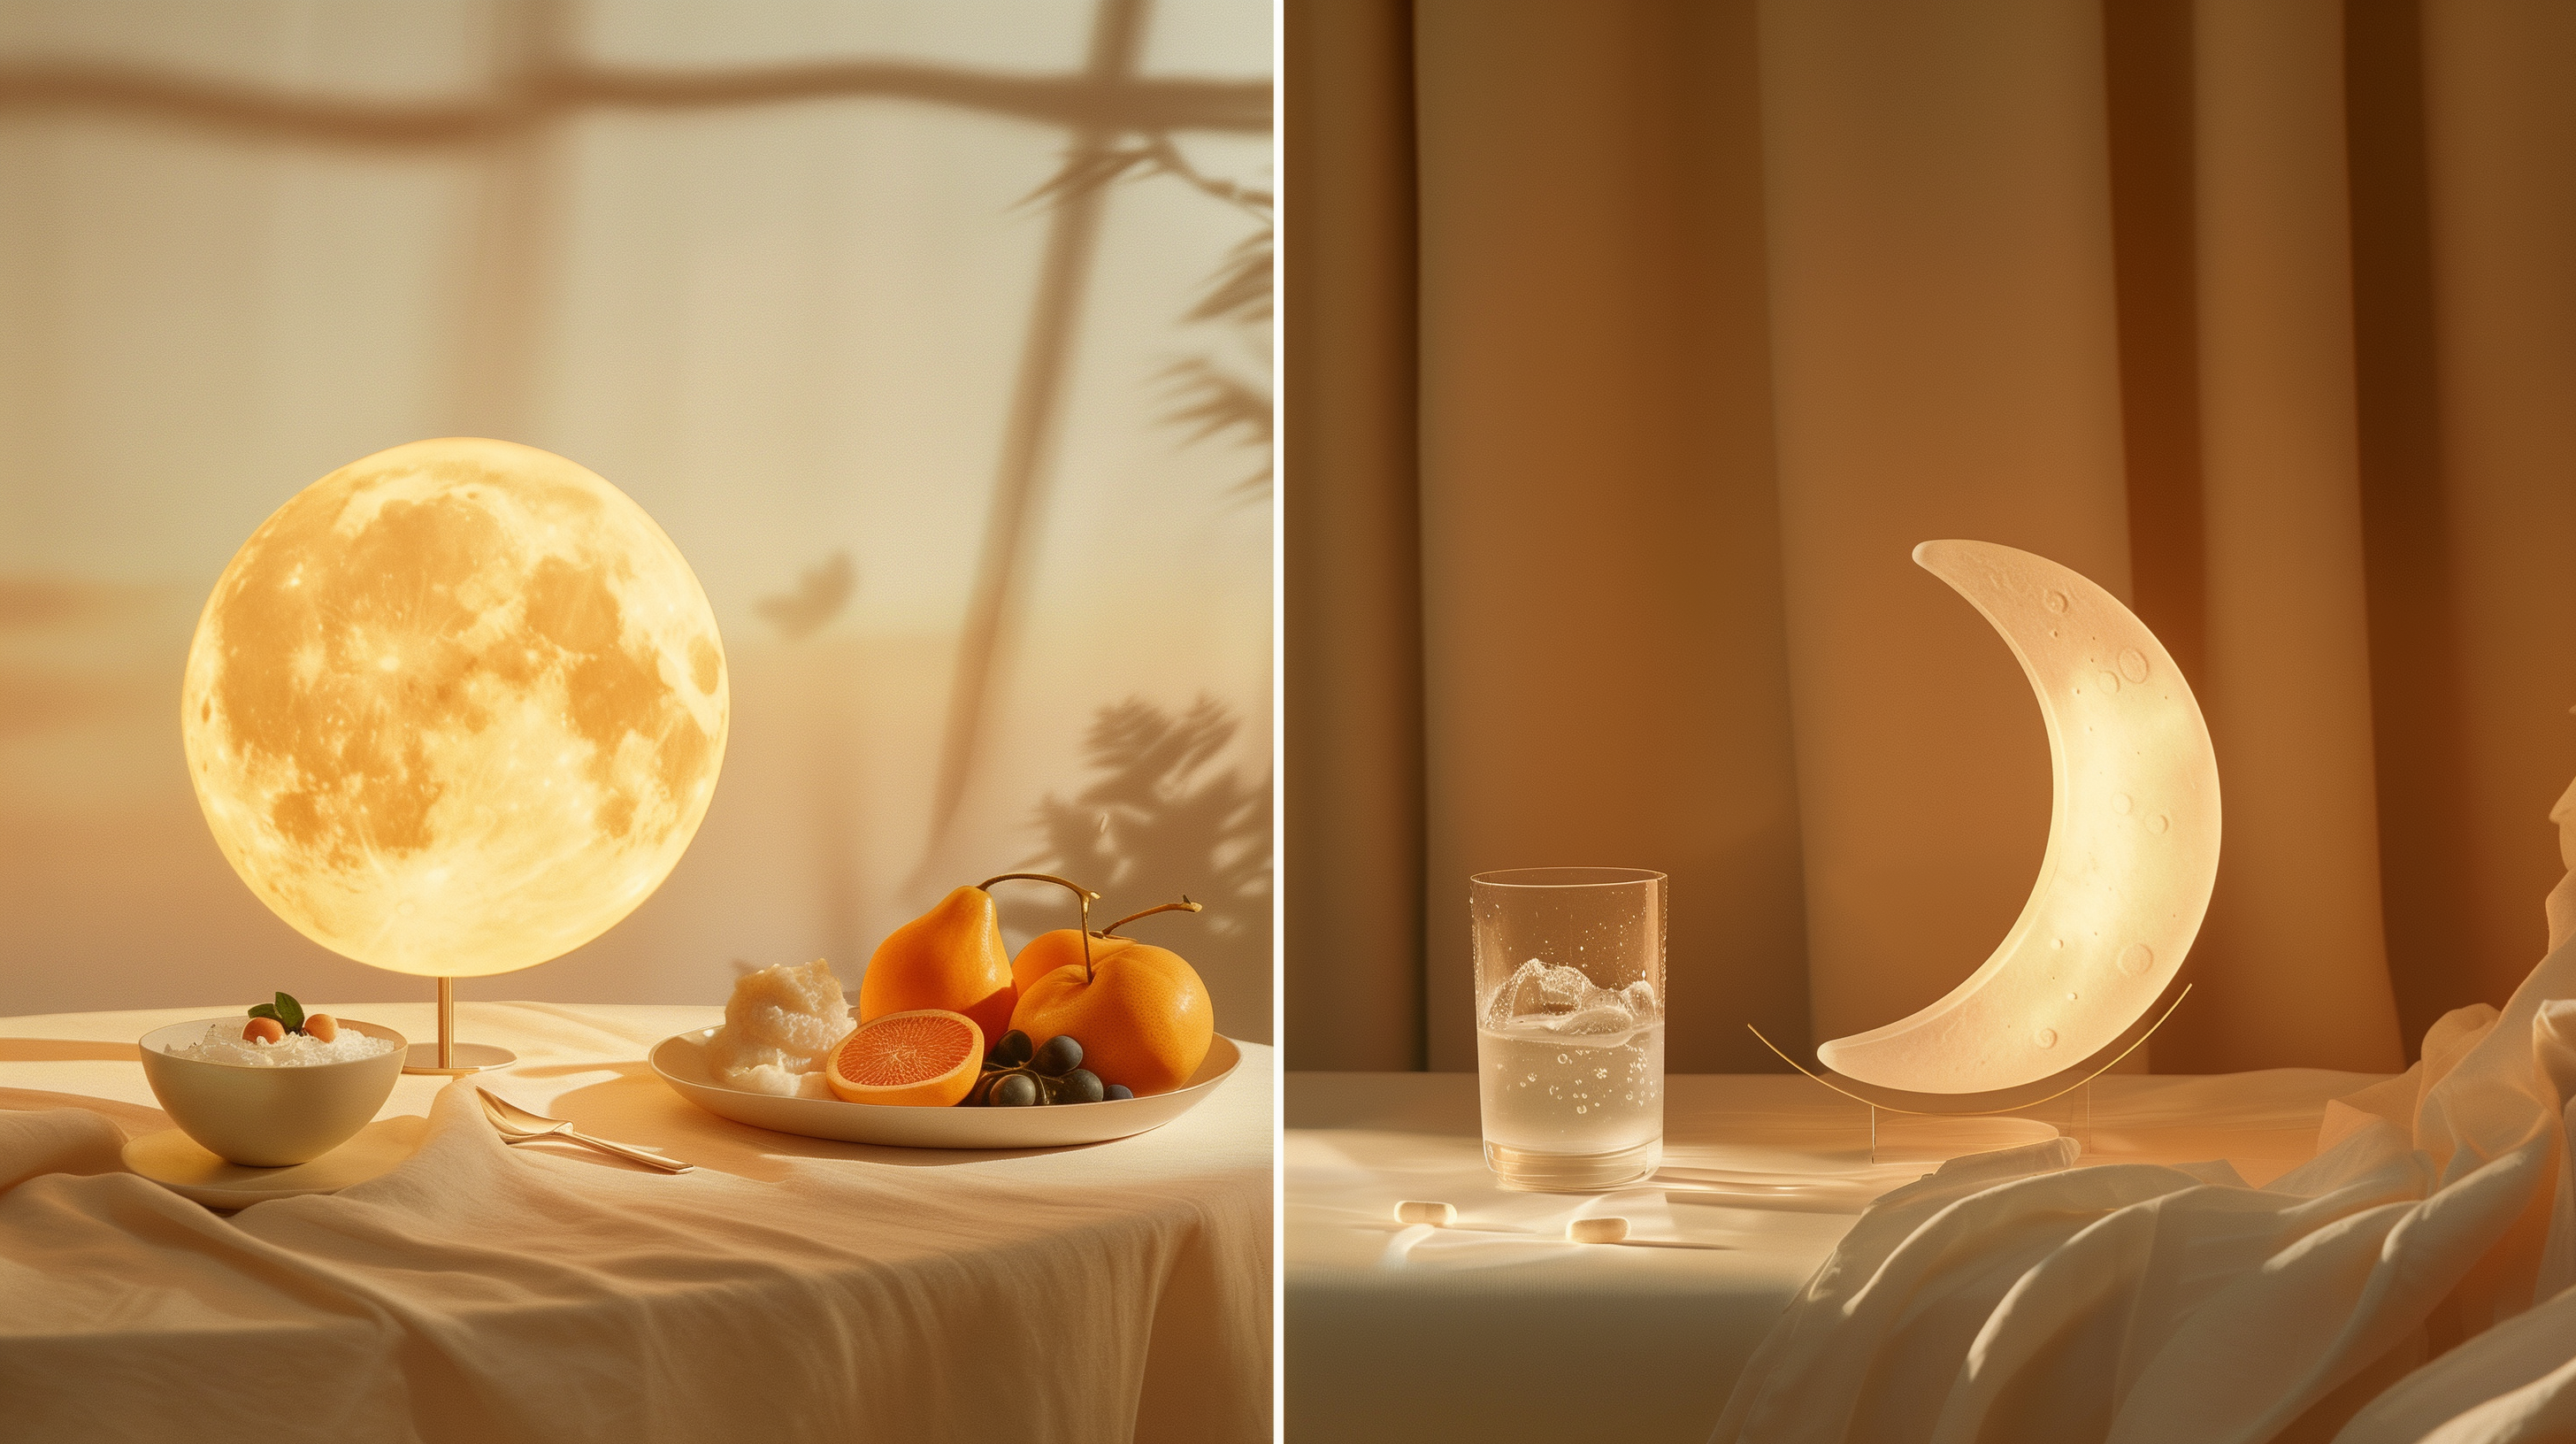 split image: one side showing a sun and a breakfast table with yogurt and fruits; the other side featuring a moon, nightstand with a glass of water and a probiotic